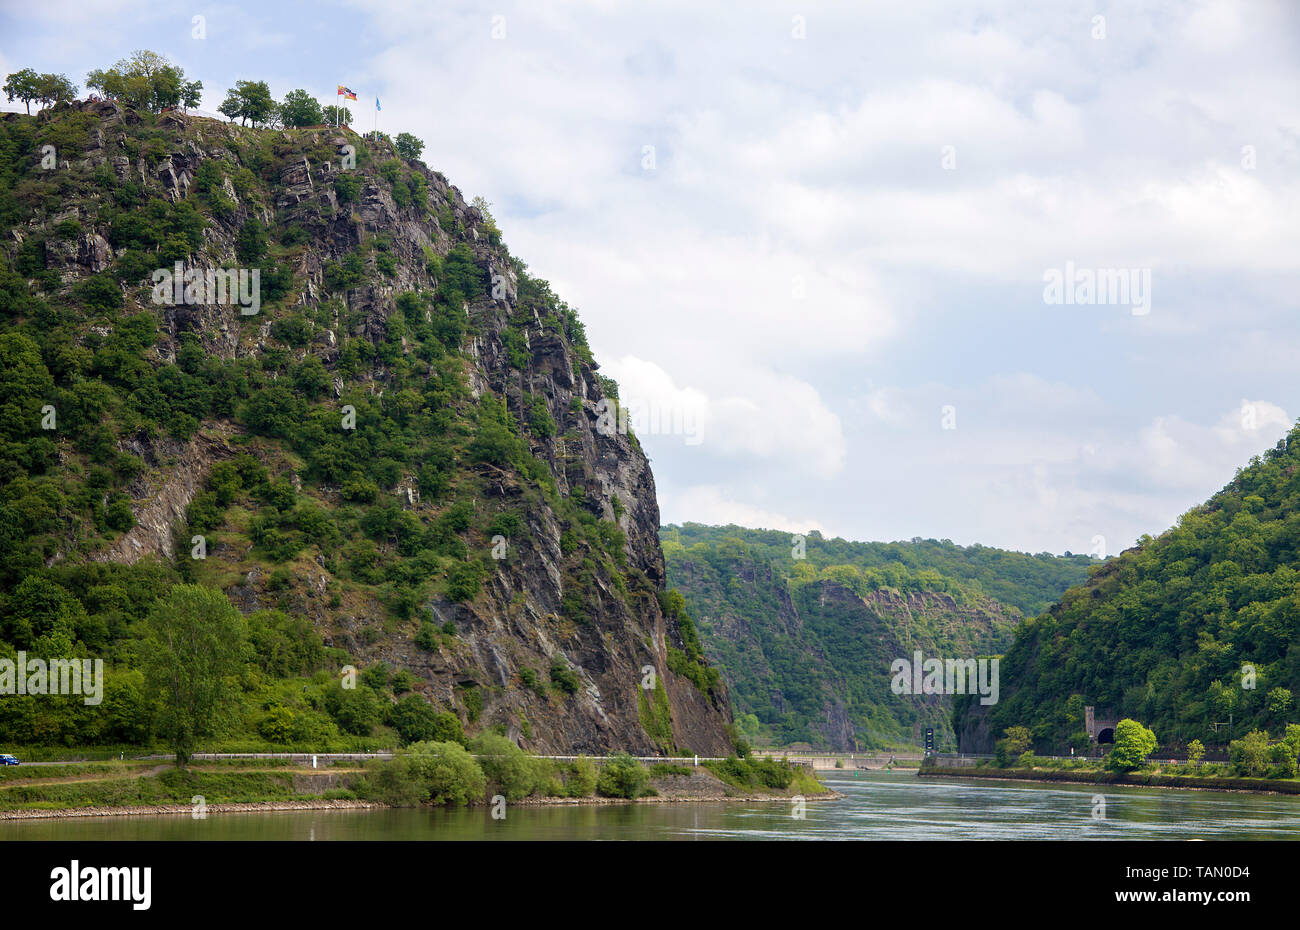 Lorelei rock at right bank of the rhine river, St. Goarshausen, Unesco world heritage site, Upper Middle Rhine Valley, Rhineland-Palatinate, Germany Stock Photo